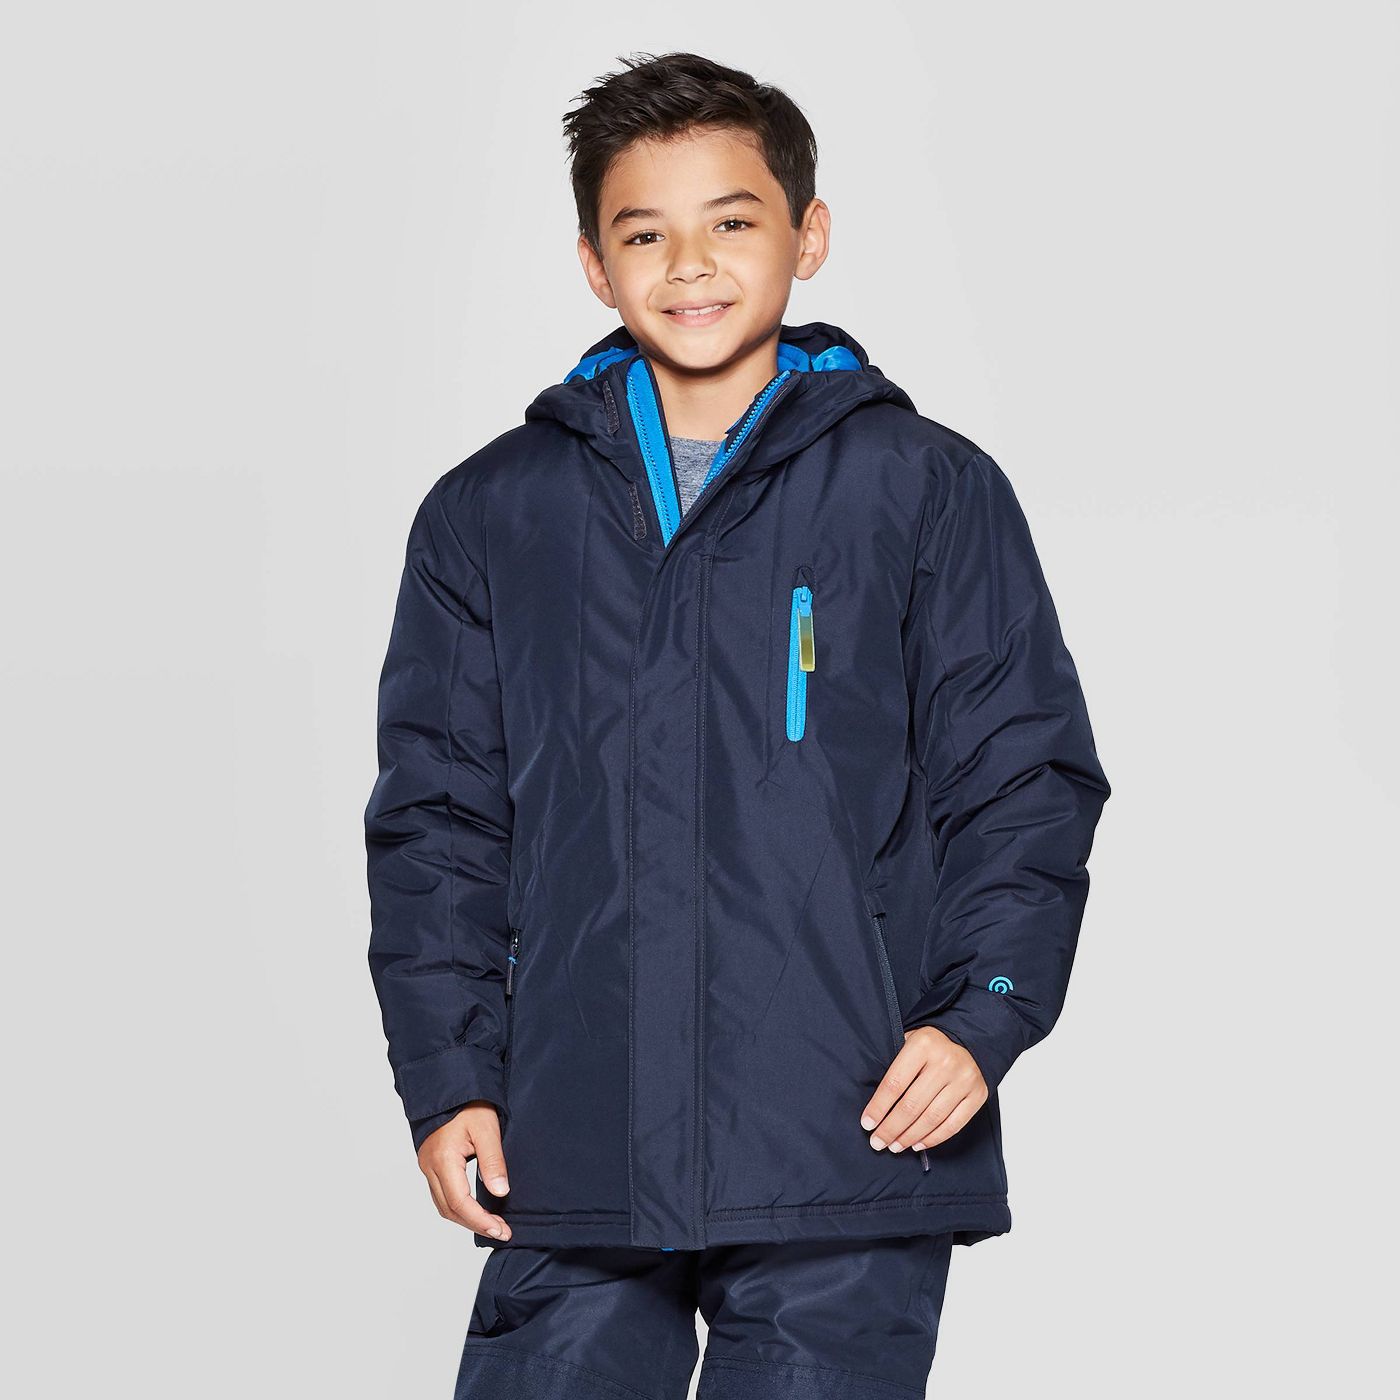 Boys' 3-in-1 System Jacket - C9 Champion® - image 1 of 4